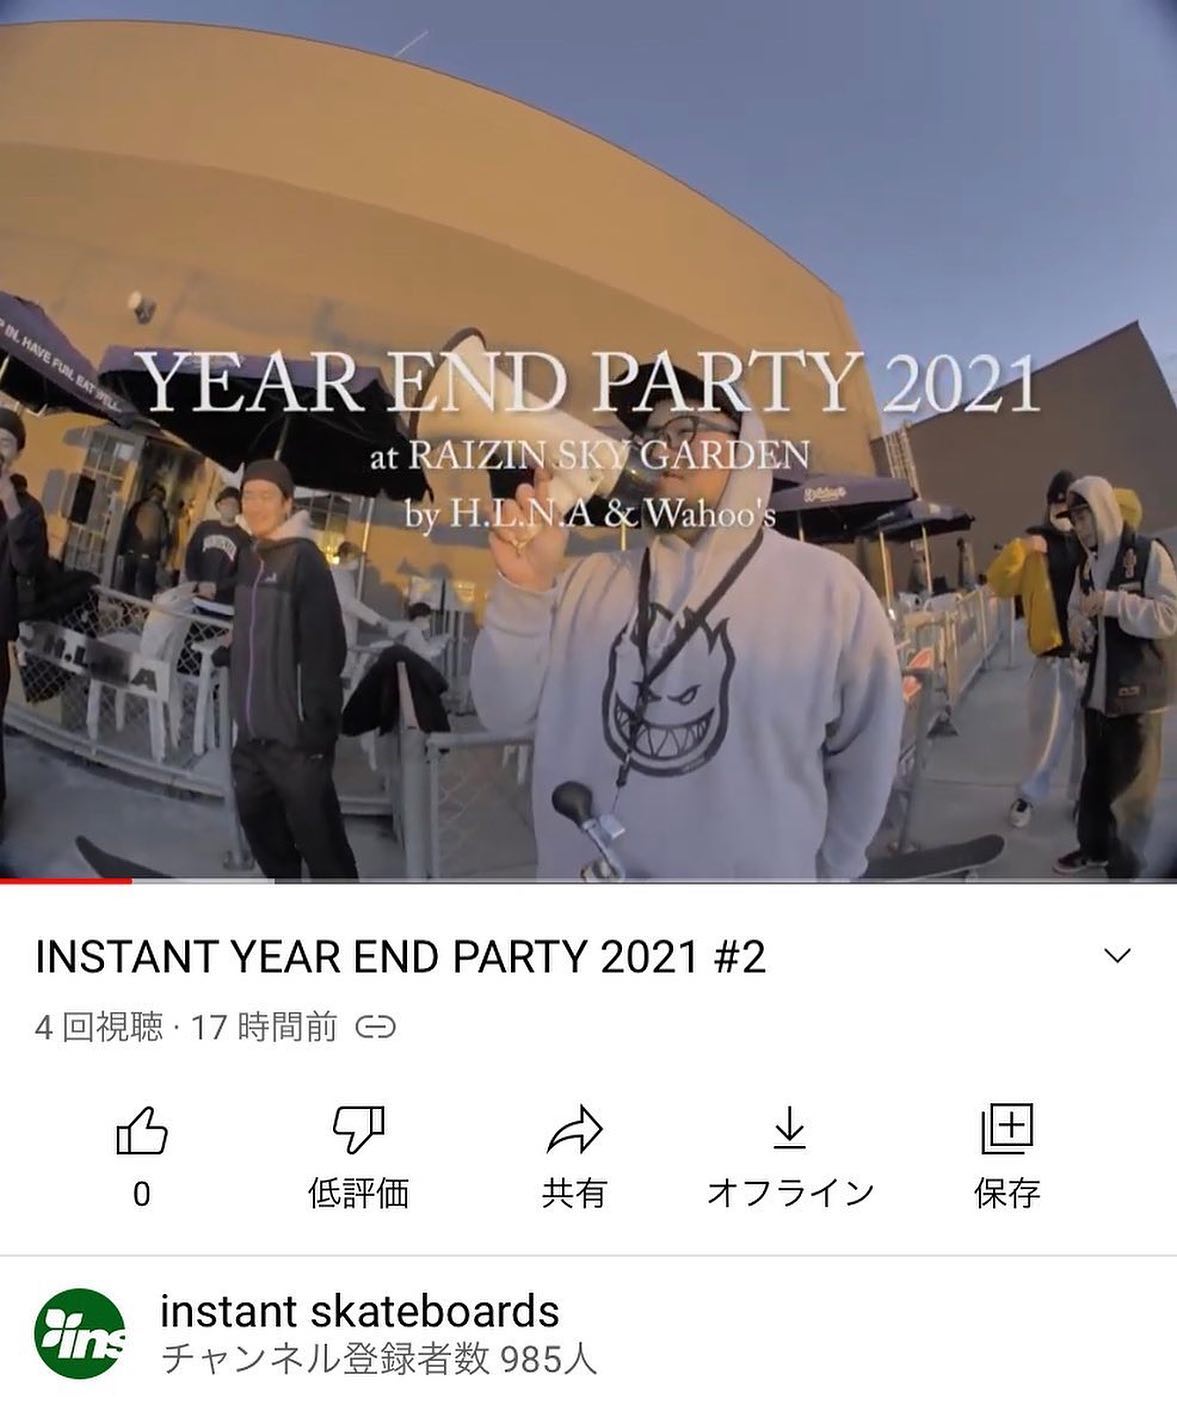 INSTANT YEAR END PARTY 2021 Video #2Film & Edit by @koto_mov 映像はインスタント各店のブログまたはプロフィールのリンクよりチェックできます！！